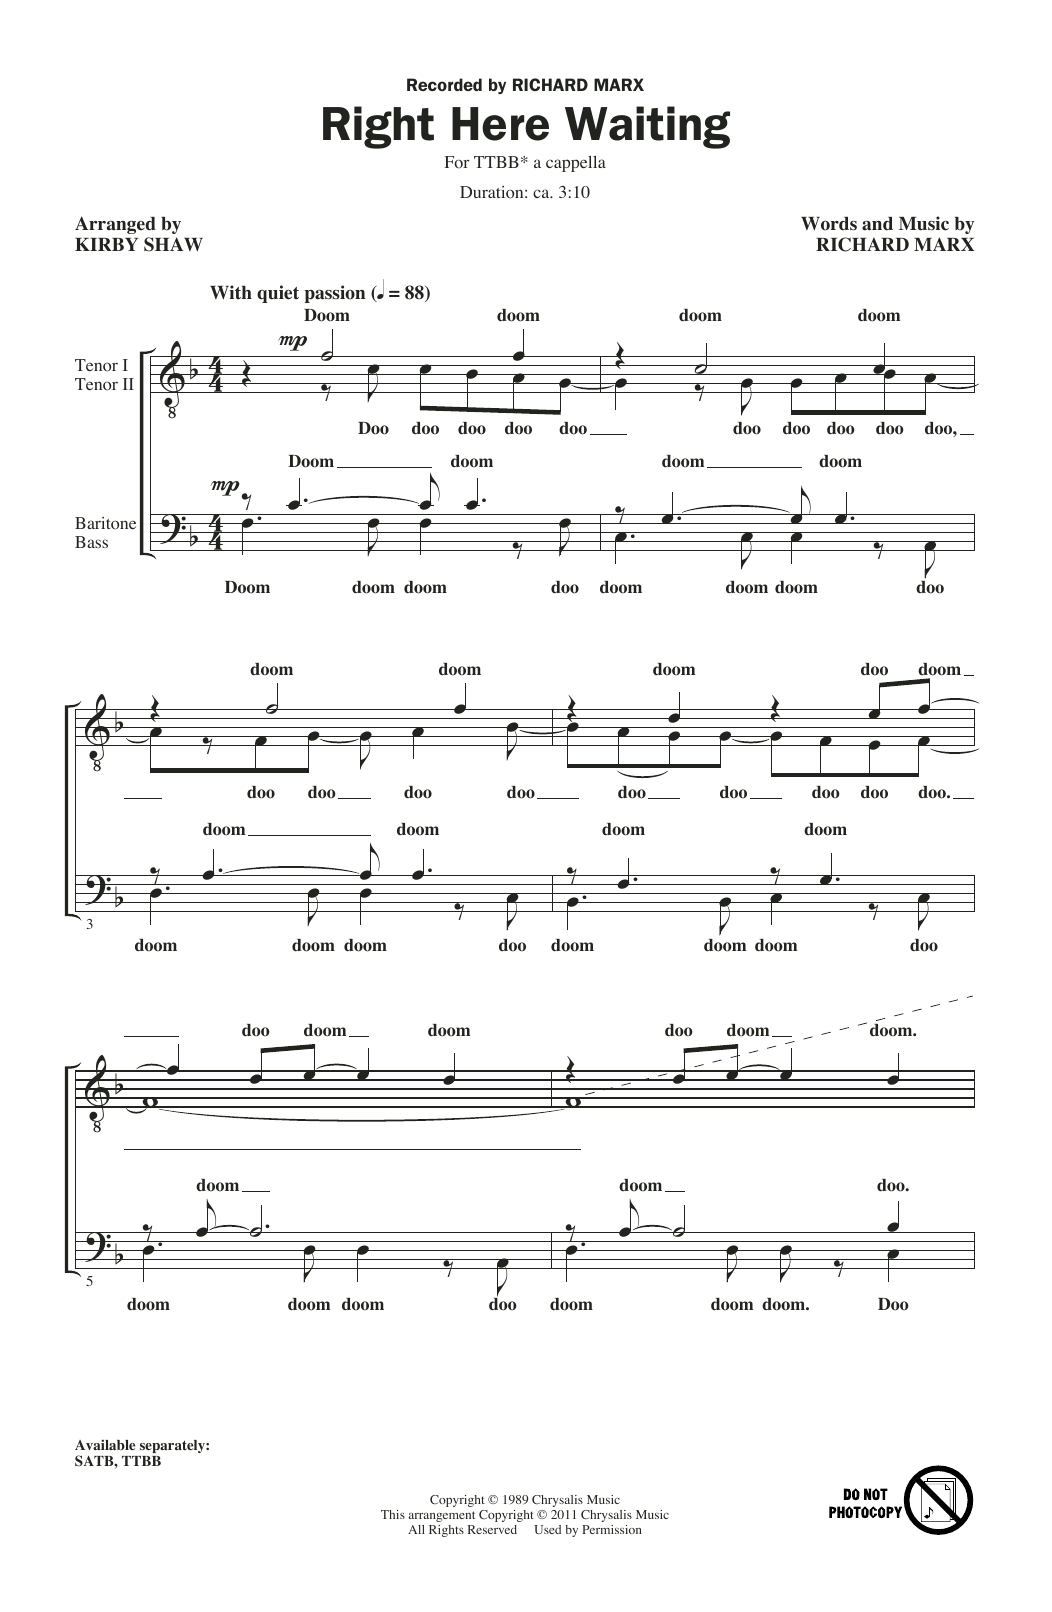 Download Richard Marx Right Here Waiting (arr. Kirby Shaw) Sheet Music